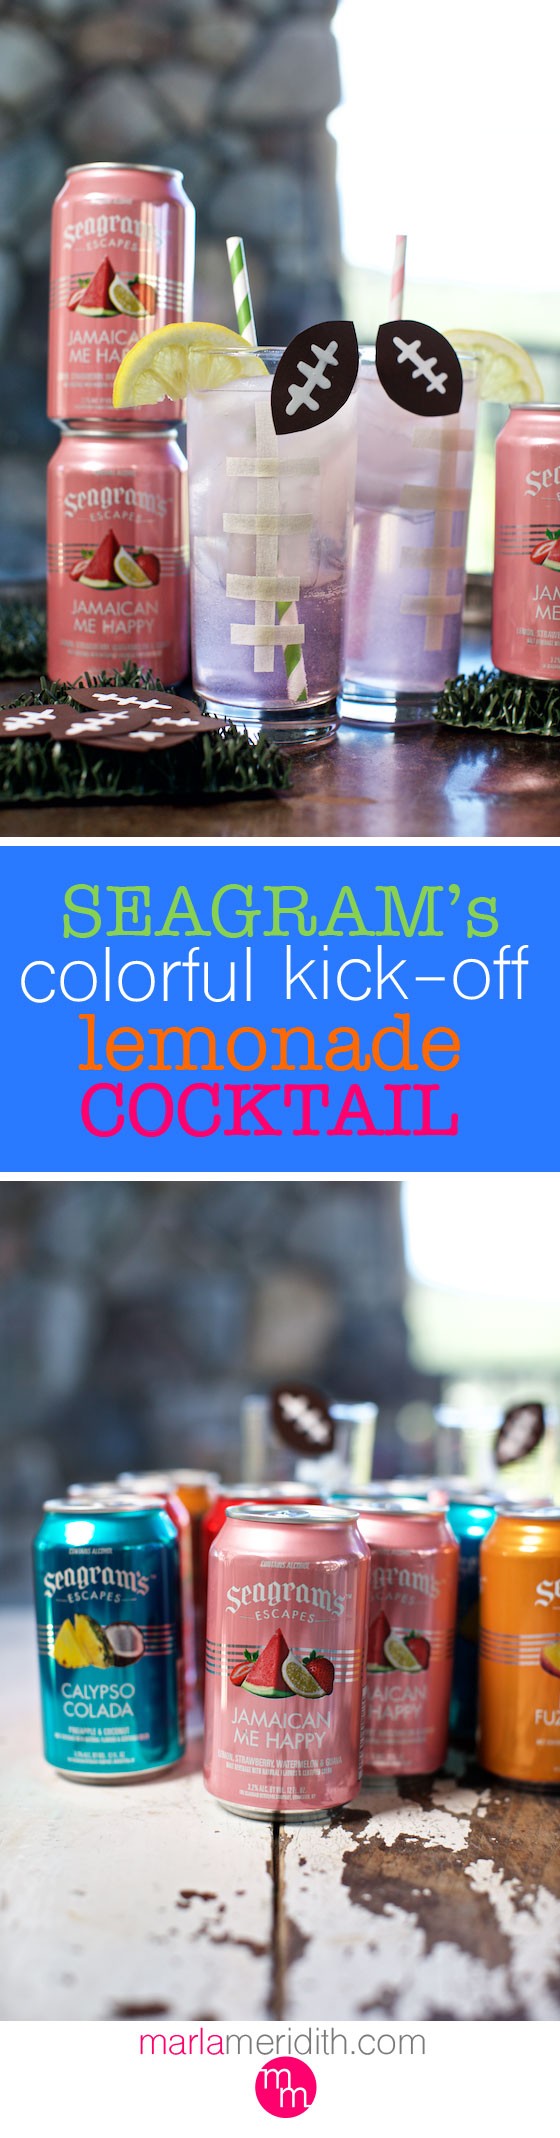 Seagram's Colorful Kickoff Lemonade Cocktail recipe for fall & football parties. MarlaMeridith.com ( @marlameridith ) @segramsescapes #colorfulkickoff